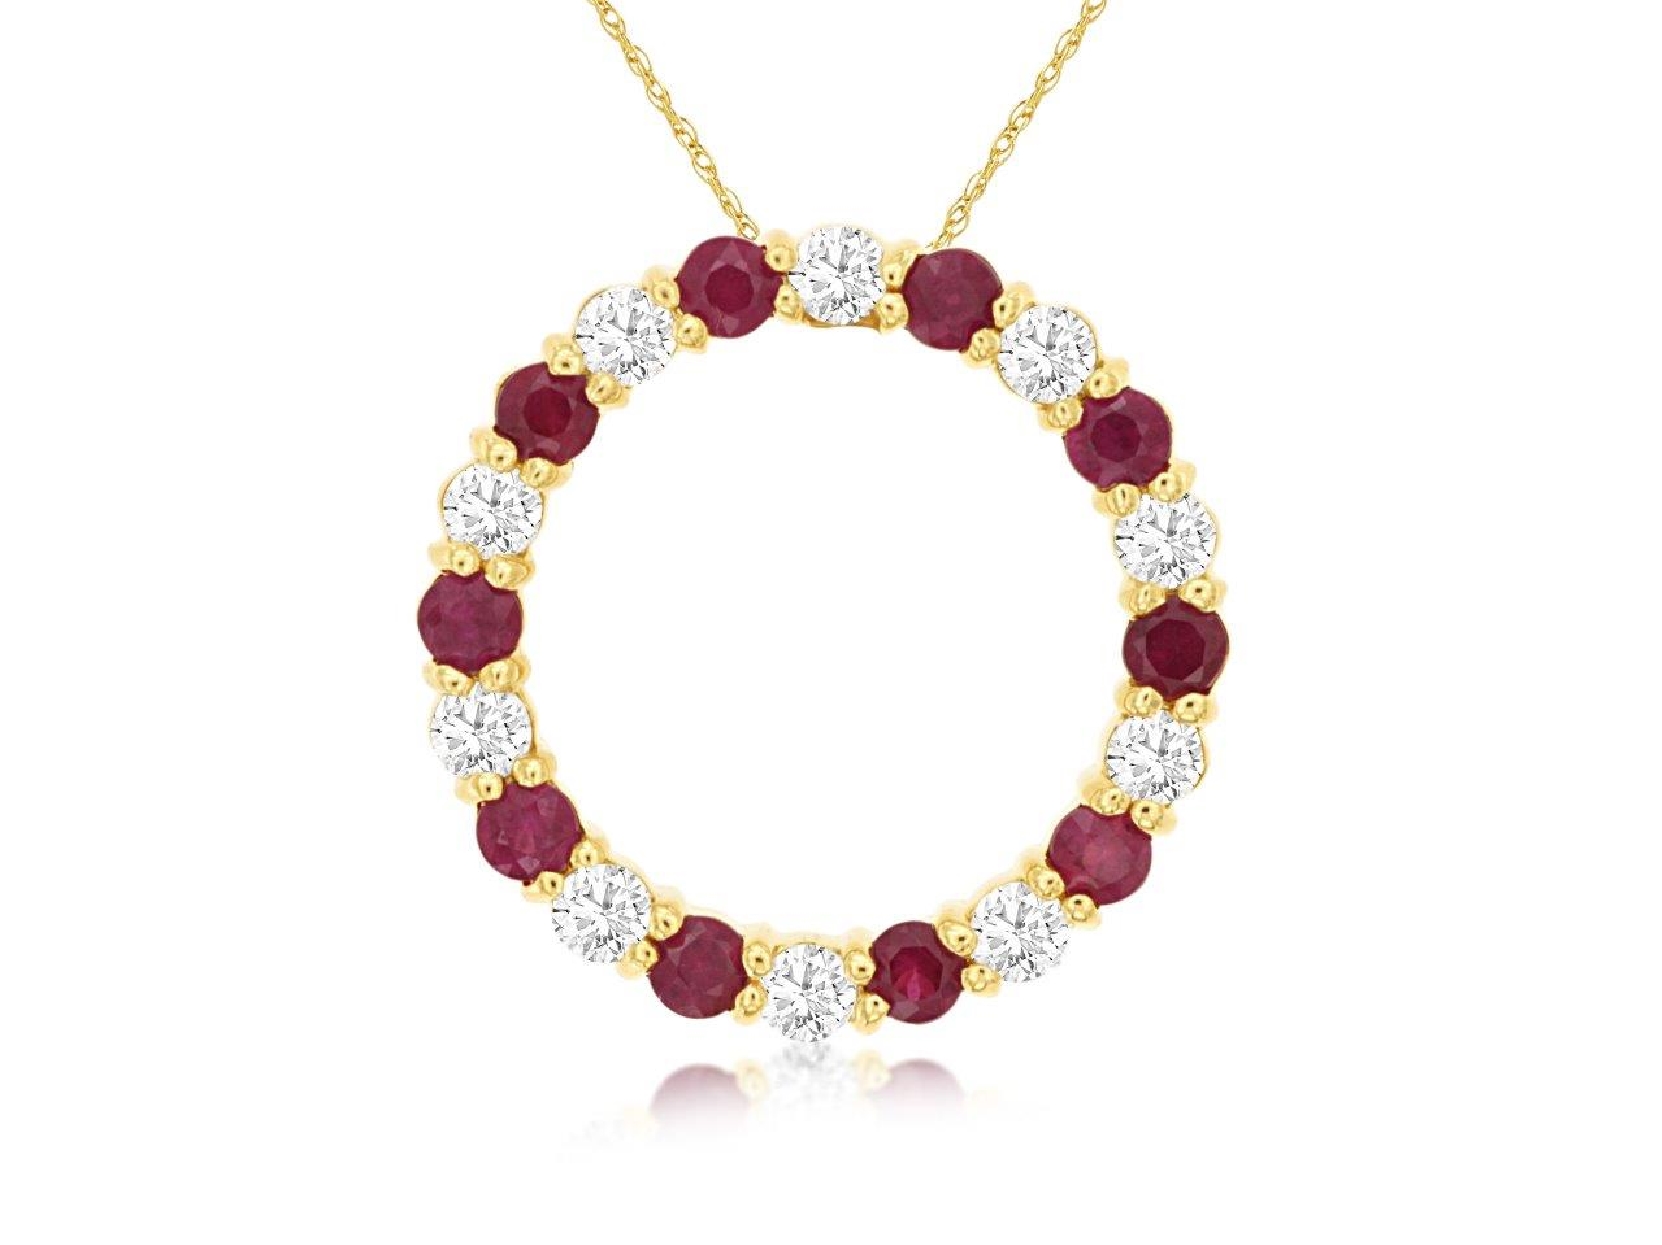 14K Yellow Gold Circle Ruby and Diamond Necklace 18 Inches
.50CT Diamond
.50CT Ruby